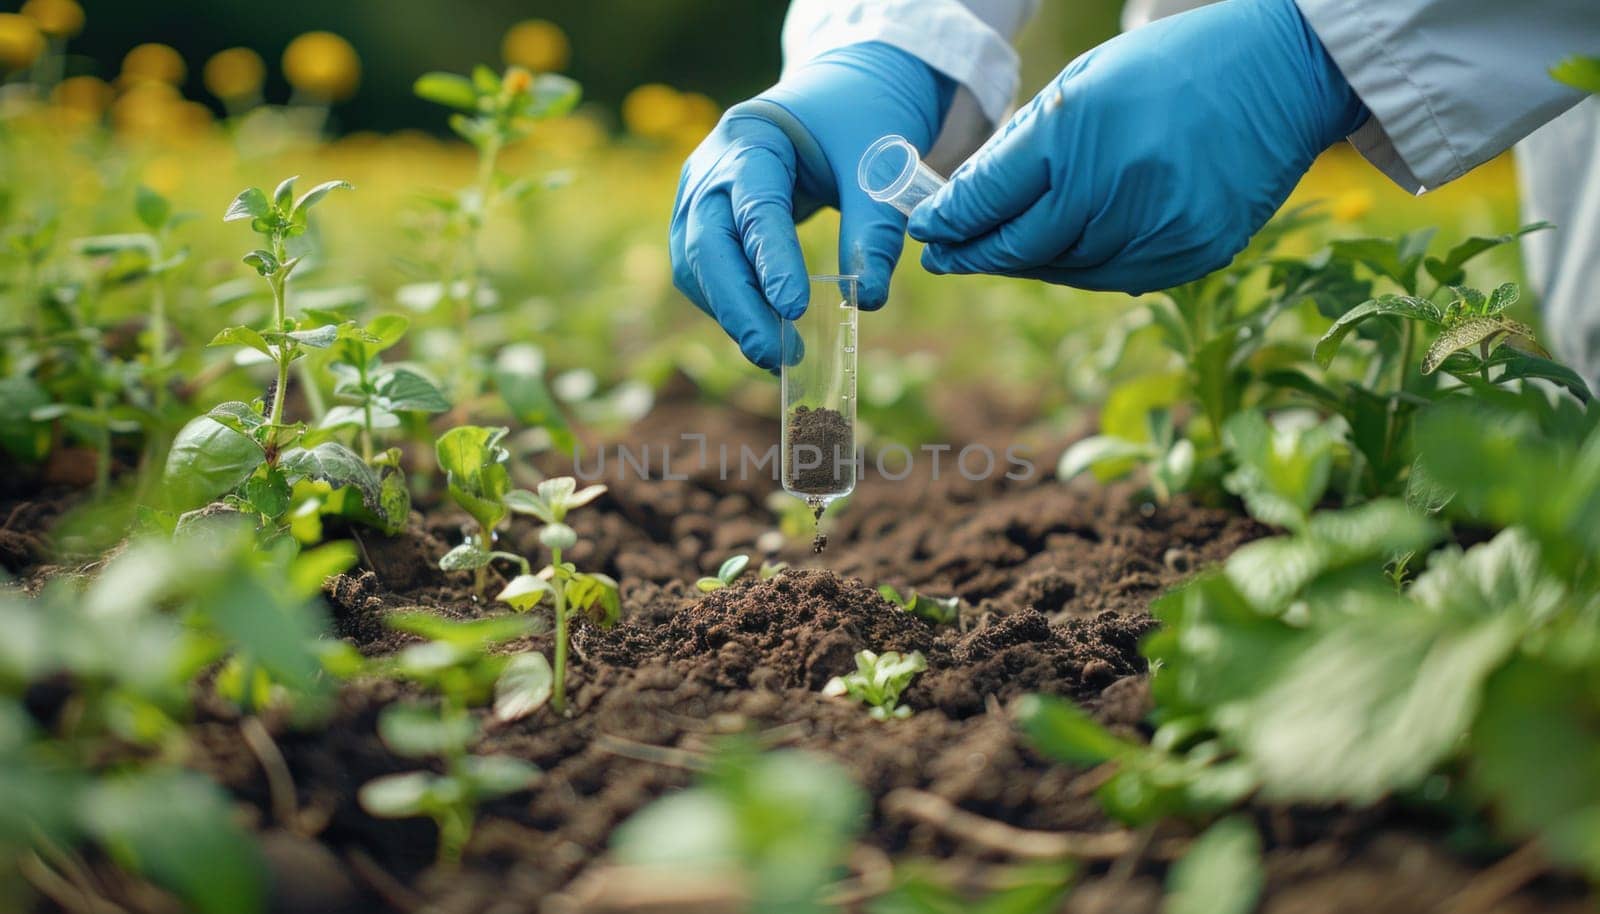 In the field, a person wearing blue gloves collects a soil sample for analysis near green shrubs and plants